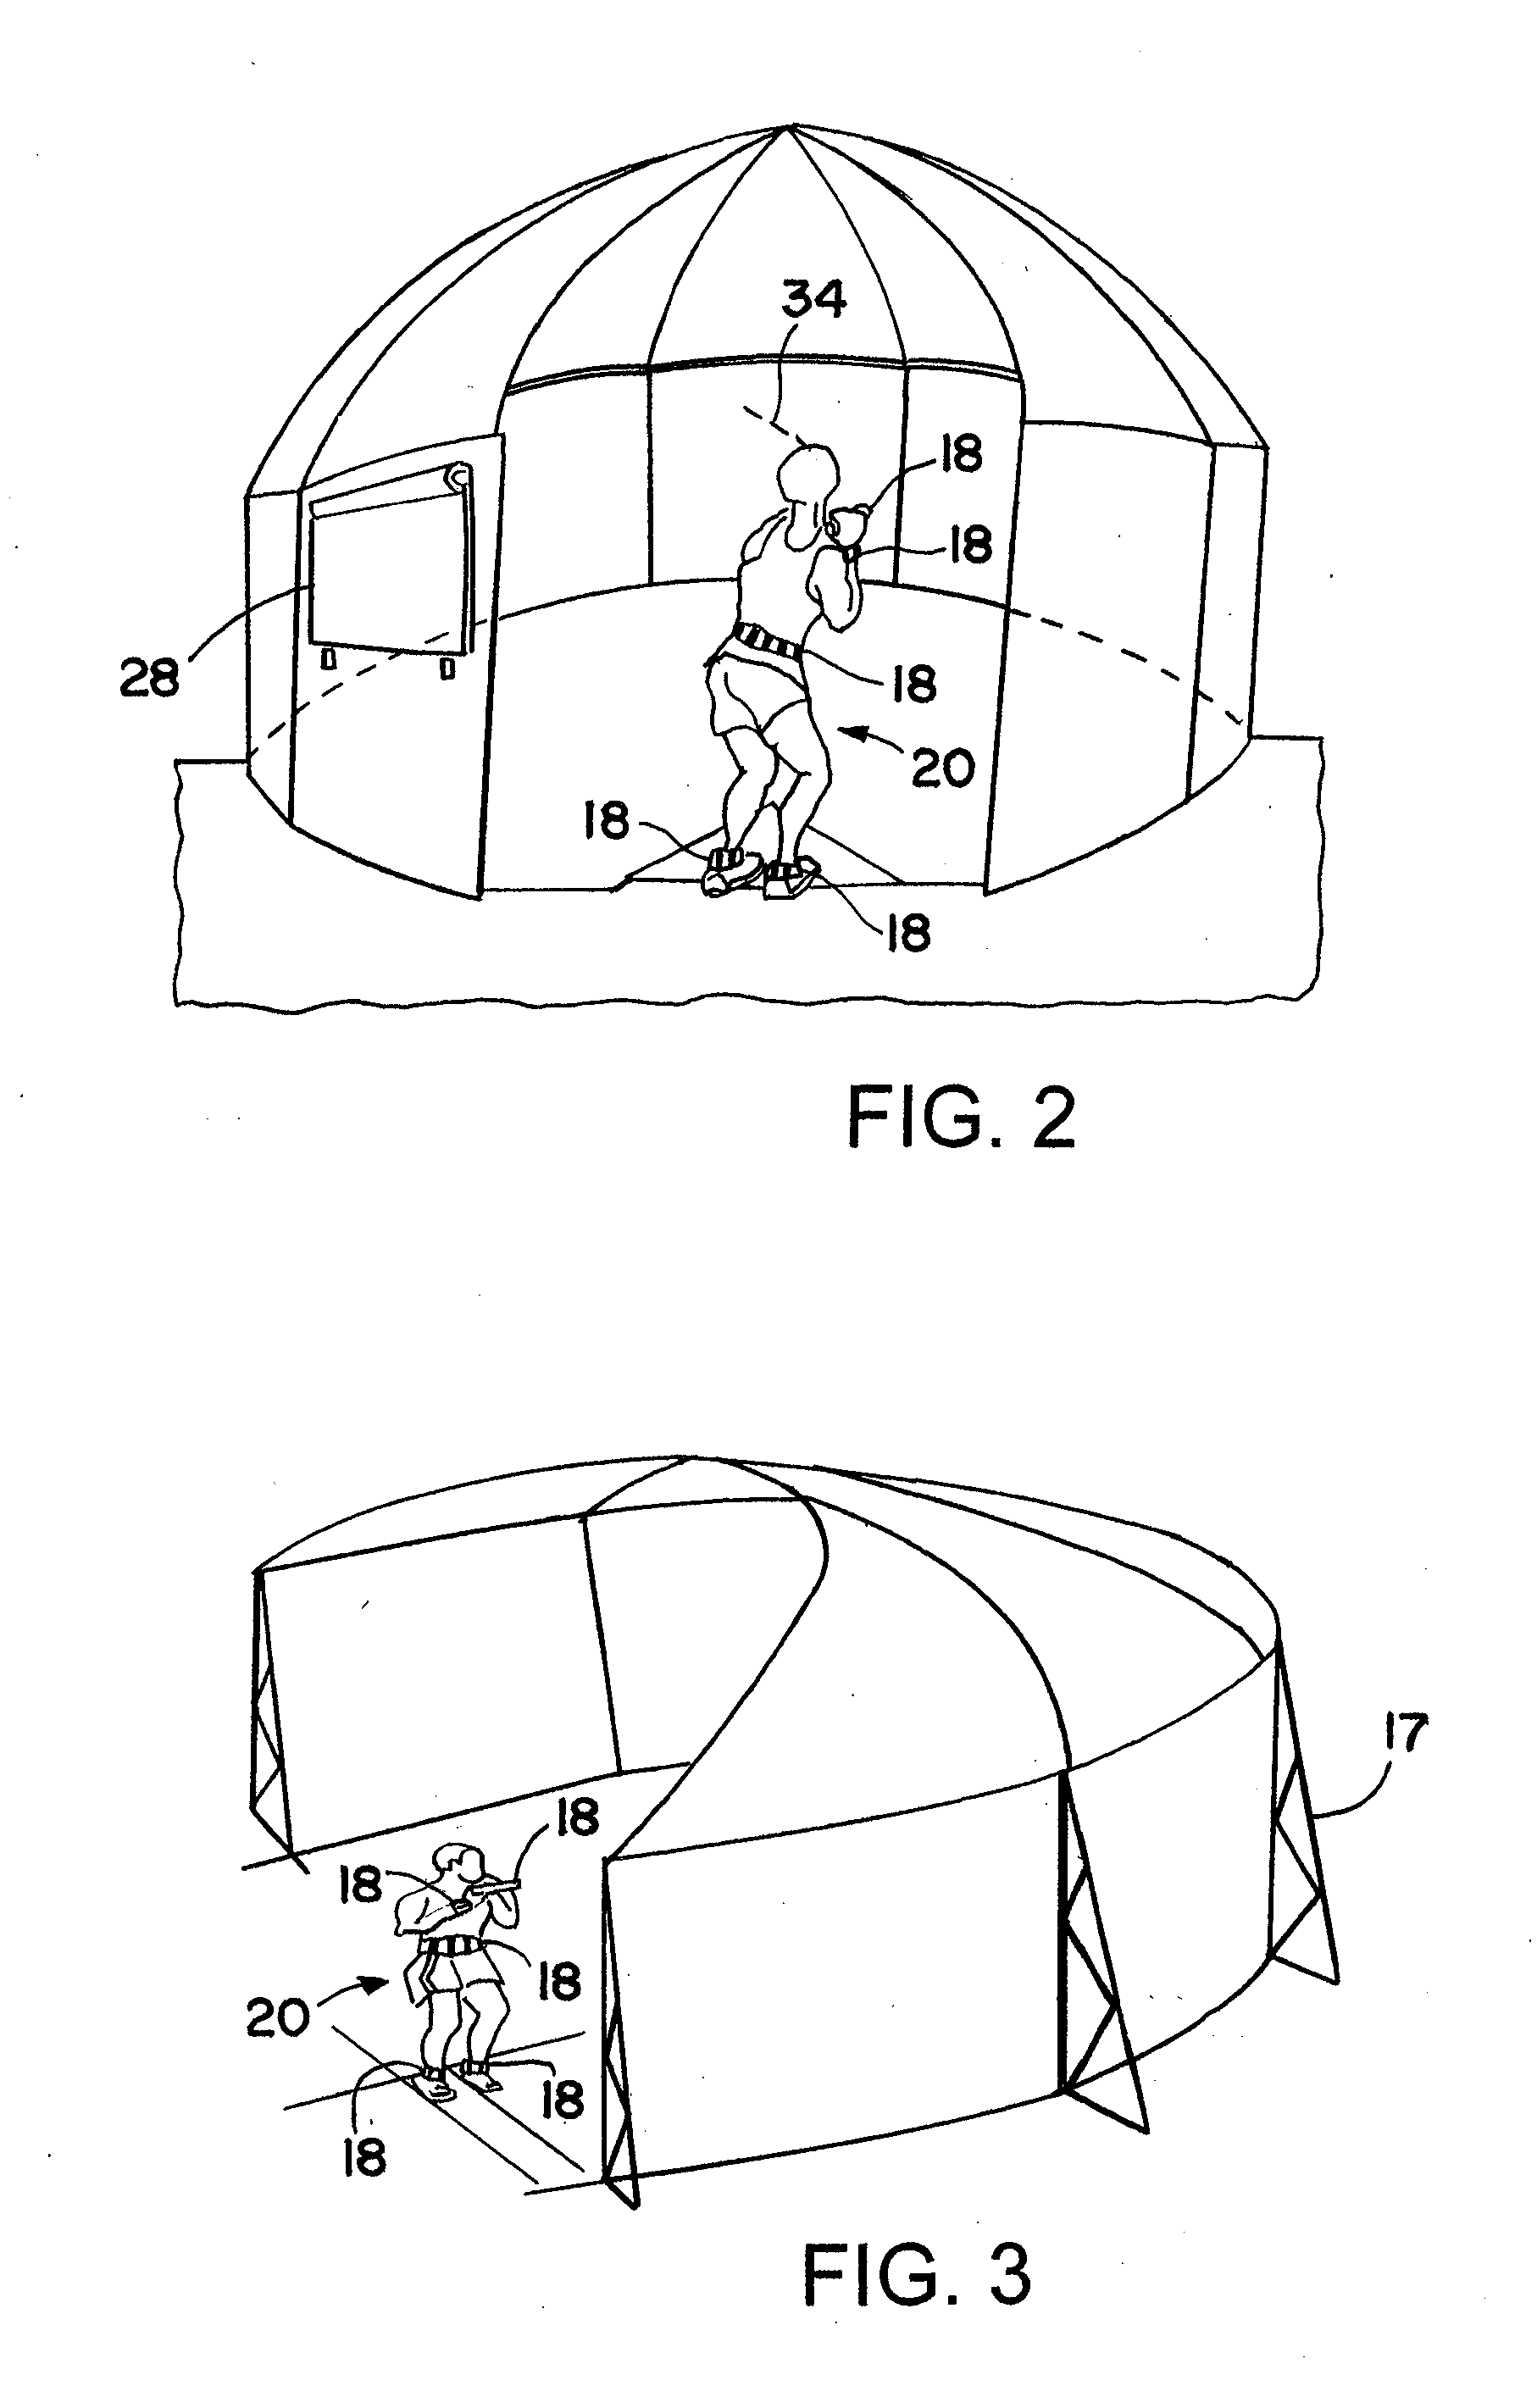 Reaction training apparatus and methods of use